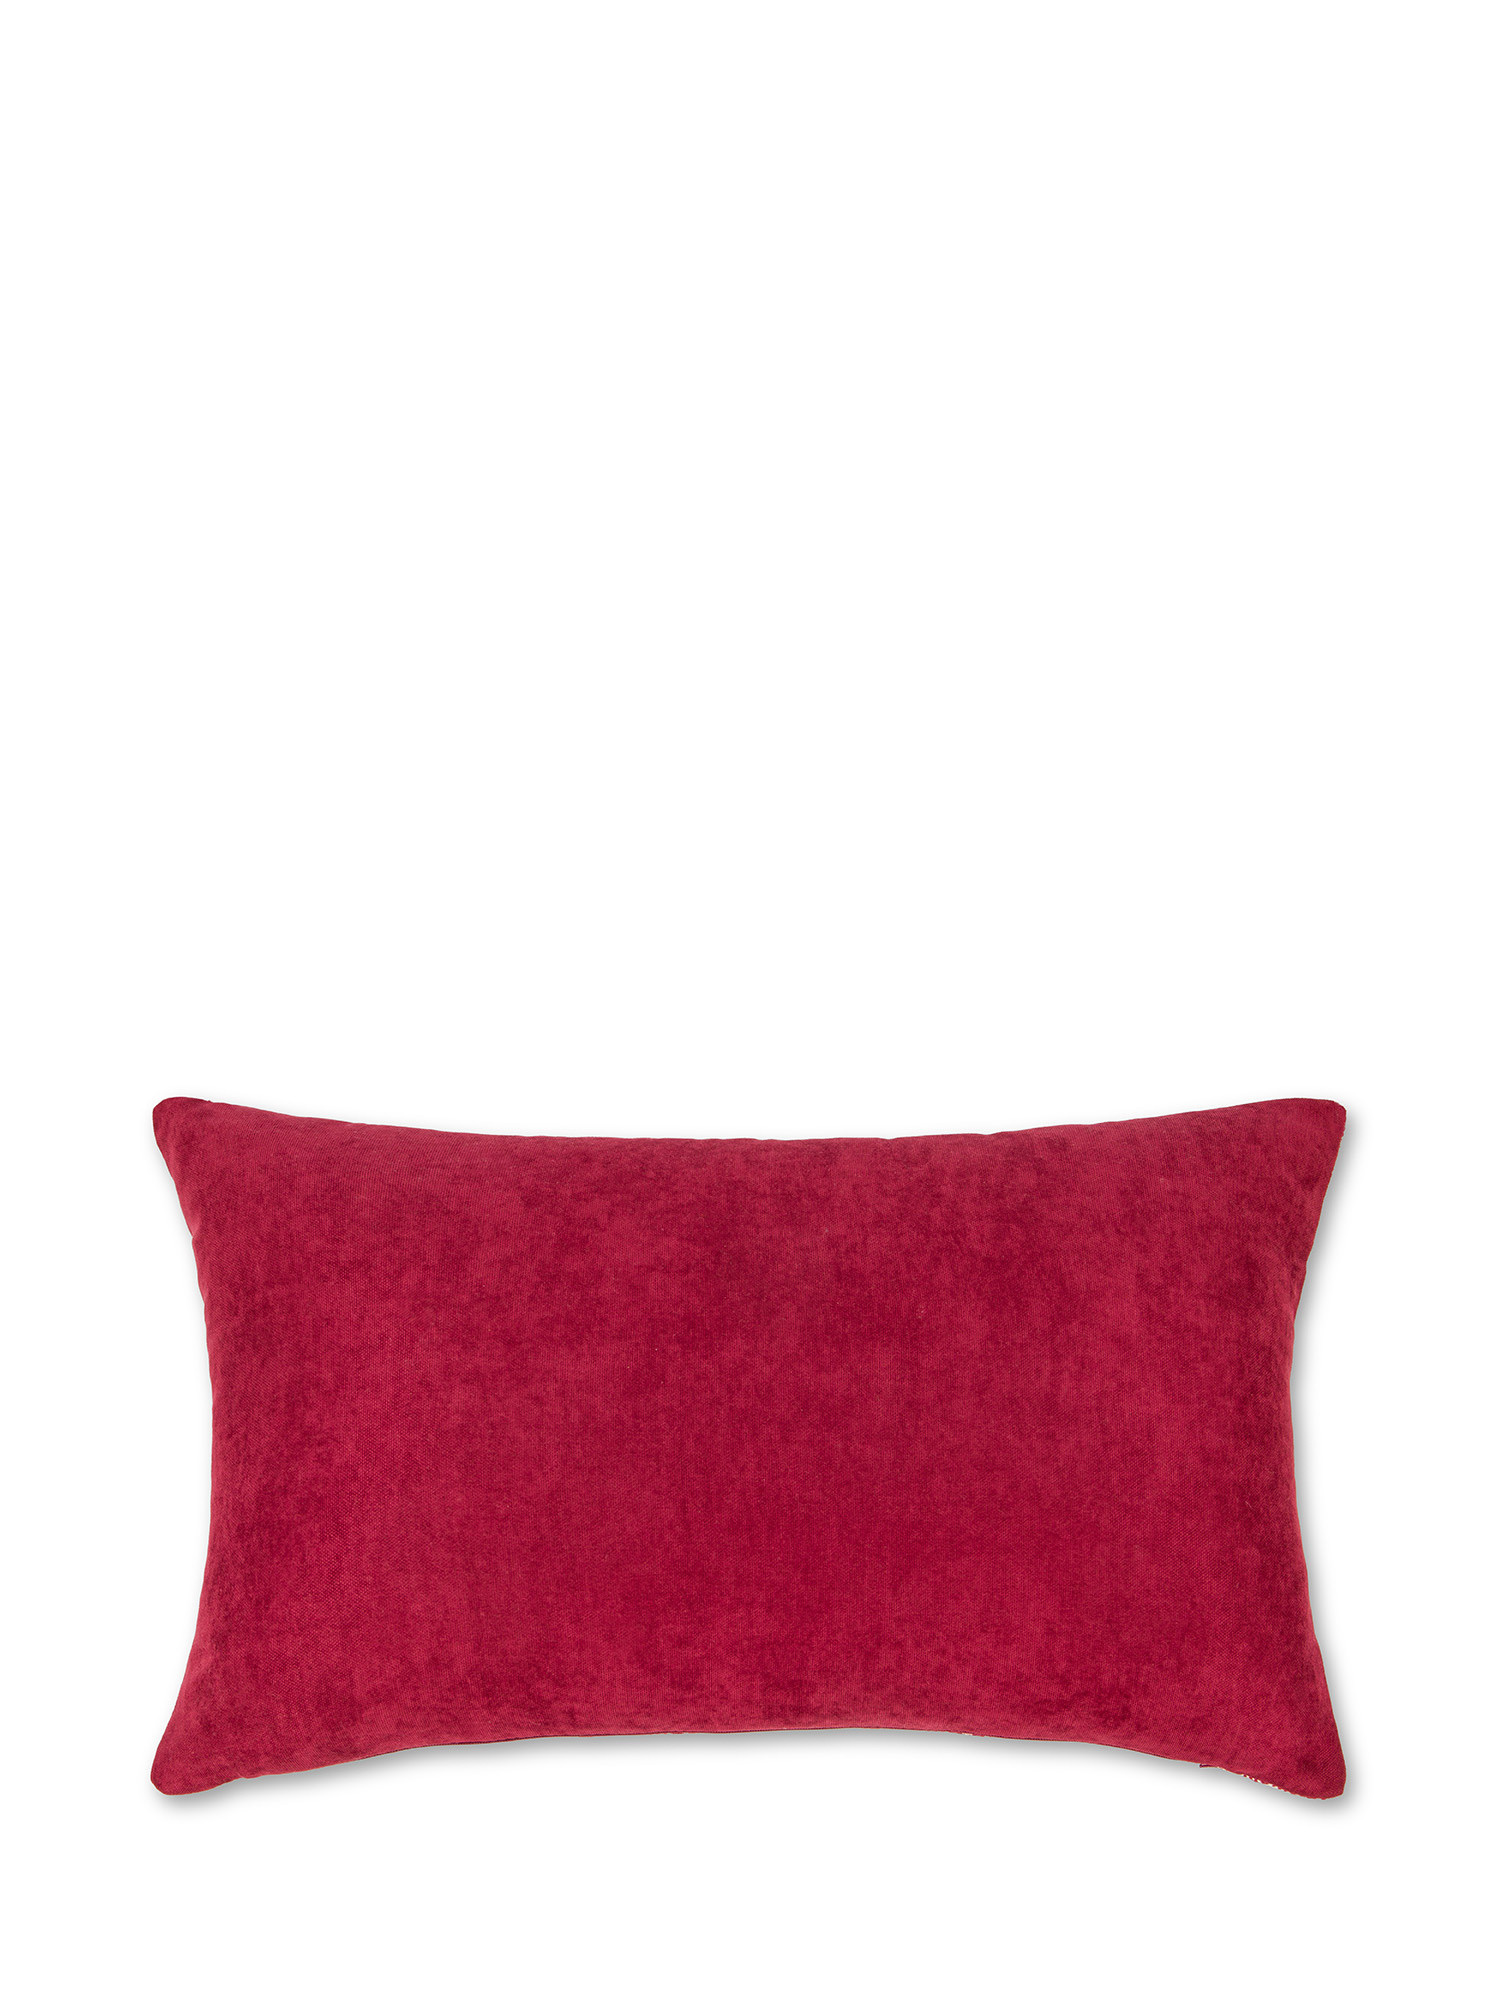 Jacquard fabric cushion with geometric pattern 35X55cm, Red, large image number 1